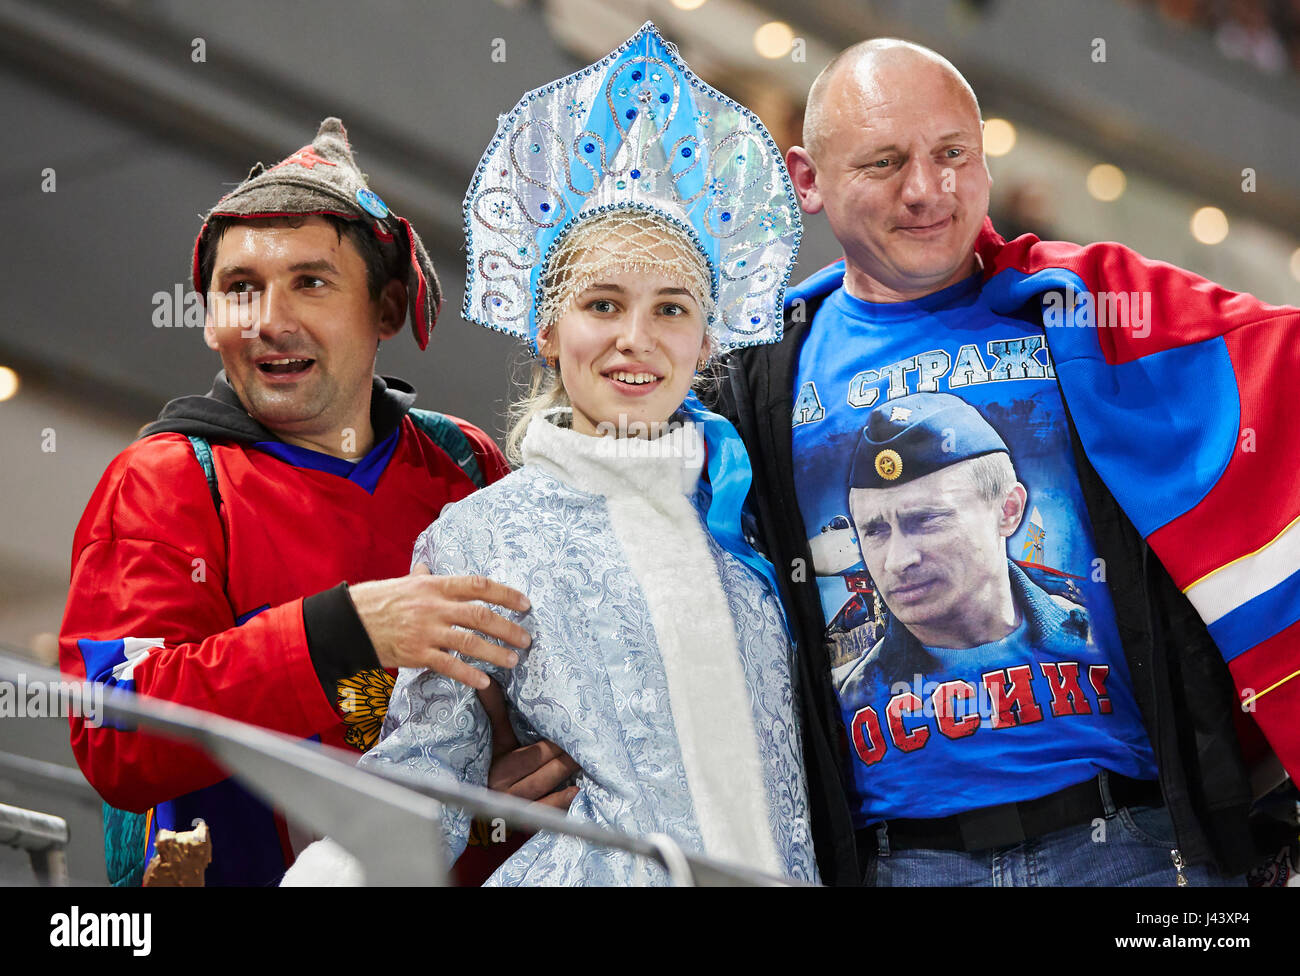 Fans with Vladimir Putin T-shirt, Russian woman in national costume, hockey fans, supporters, spectators, spectator, jacket, cowl, waistcoat, fancurve face painting, face painting, pretty,     USA - SWEDEN 4-3 Icehockey World Cup Championships 2017, Germany,  DEB , Cologne, Germany May 08, 2017 © Peter Schatz / Alamy Live News Stock Photo